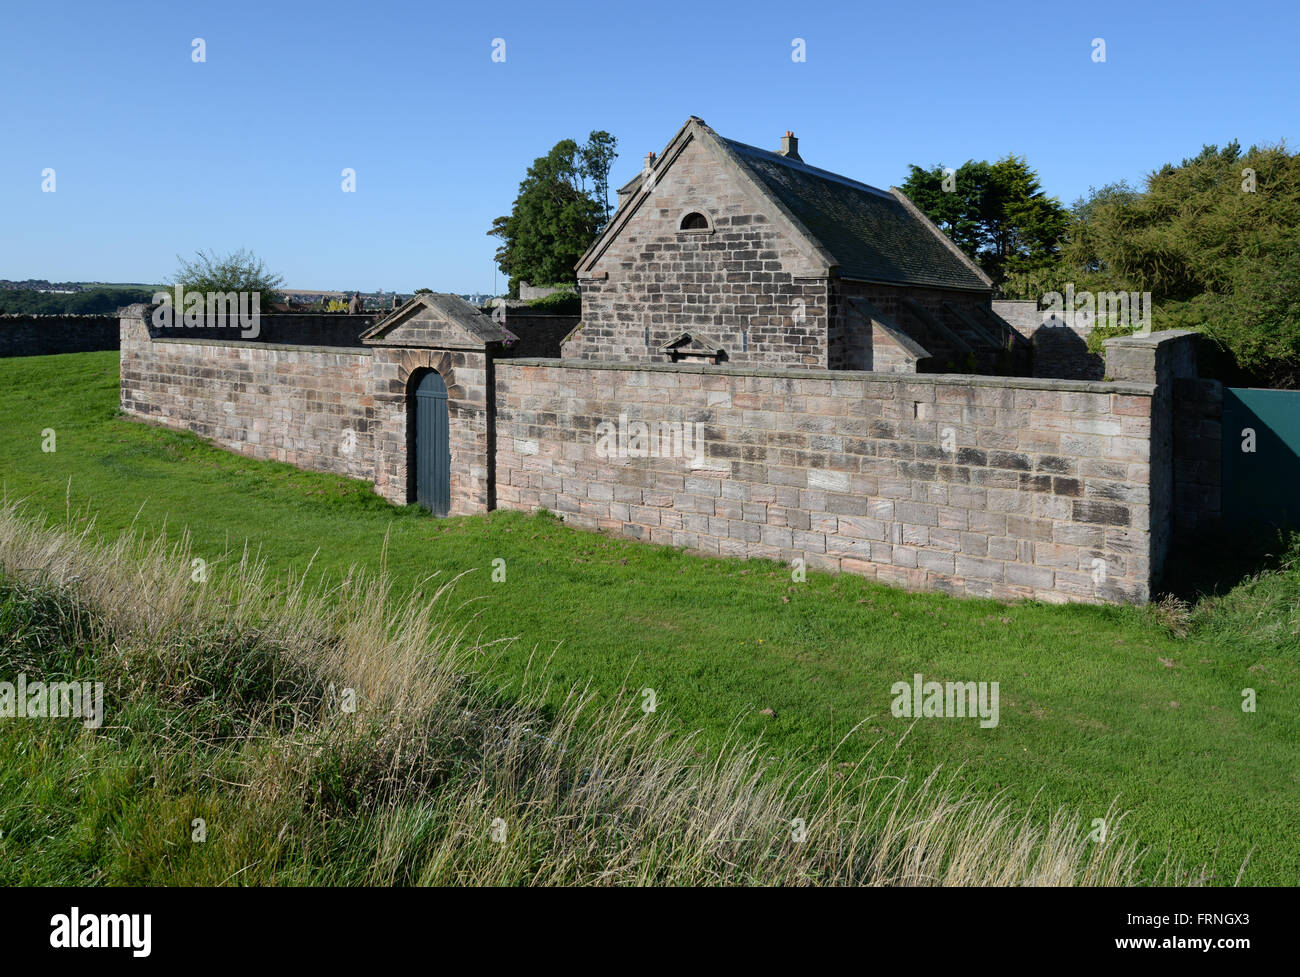 Gunpowder magazine on the town walls of the Border town of Berwick upon Tweed, England's most northerly town. Stock Photo